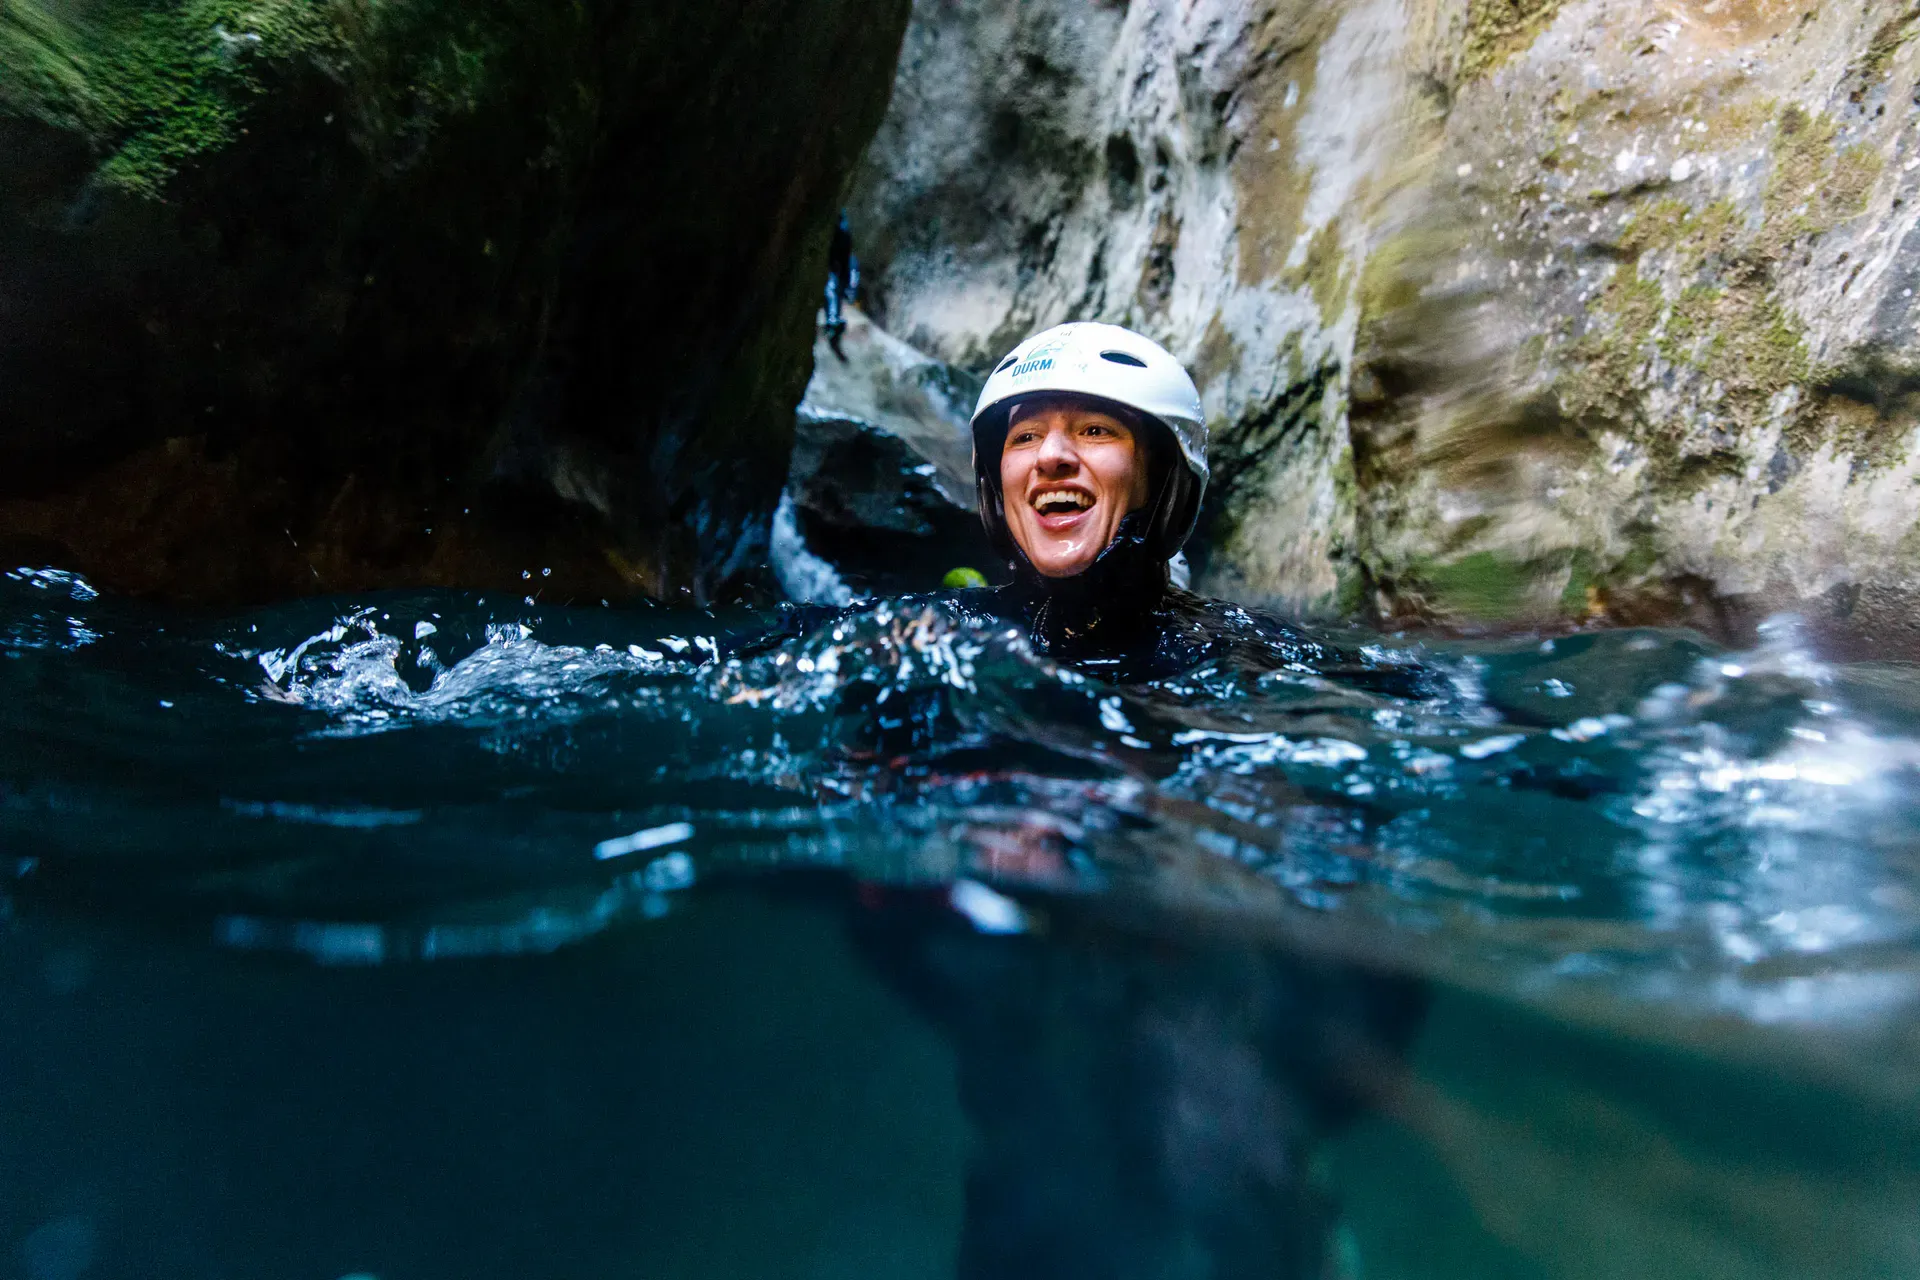 Smiling person submerged in water in a gorge